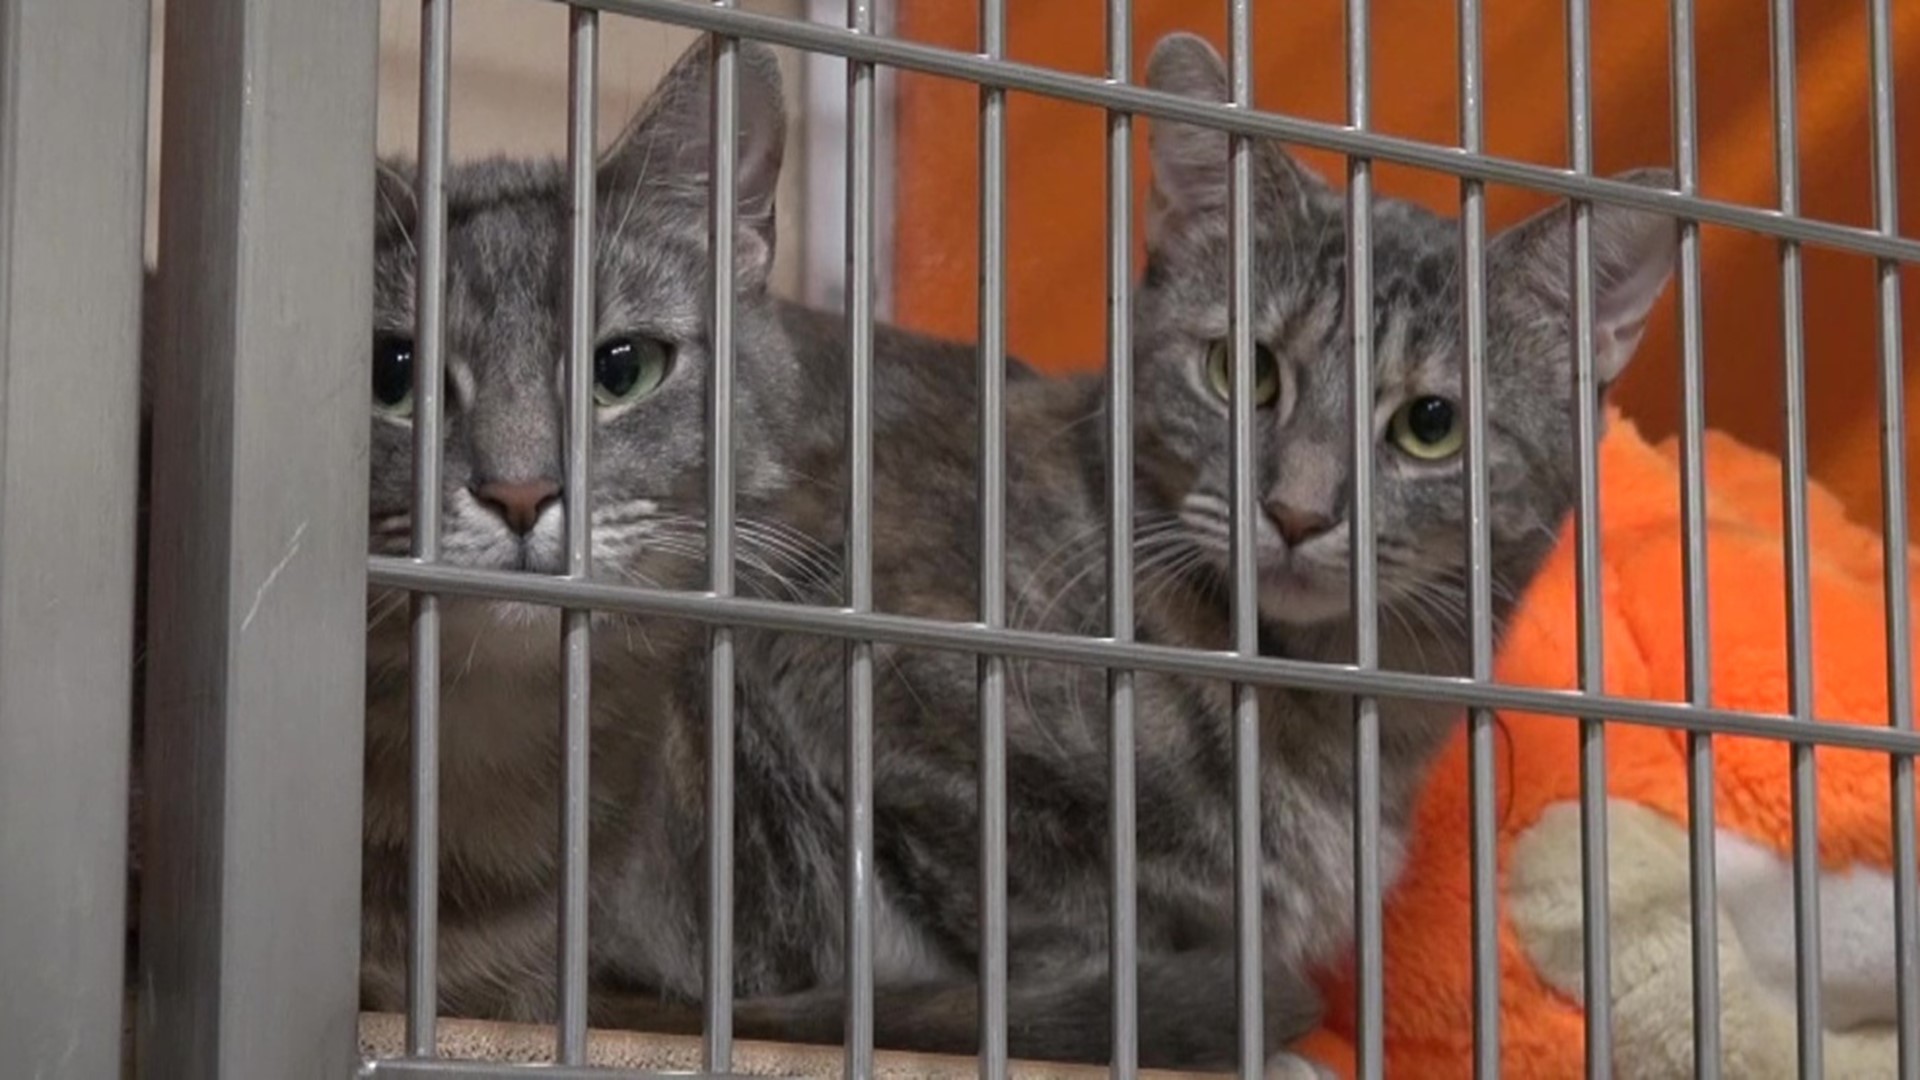 The animal shelter in Lackwanna County is no longer accepting the surrender of cats until further notice because of an influx of cats, and a decline in adoptions.